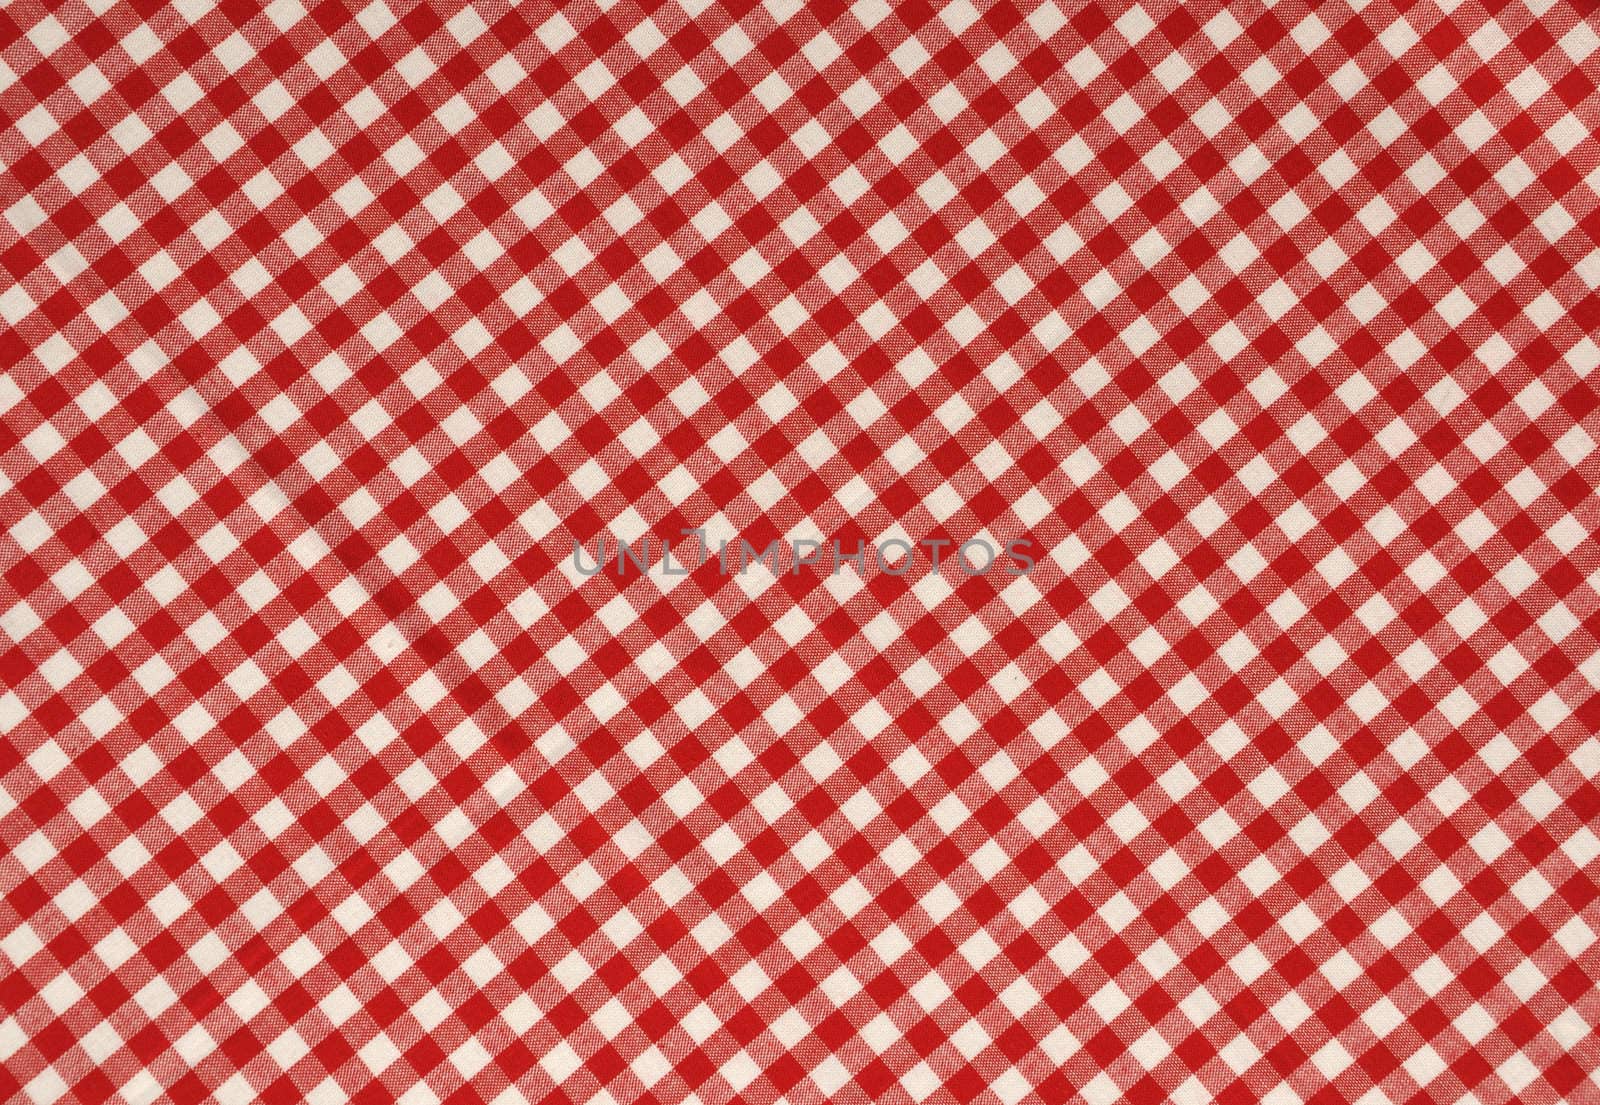 Red Gingham Background by dehooks